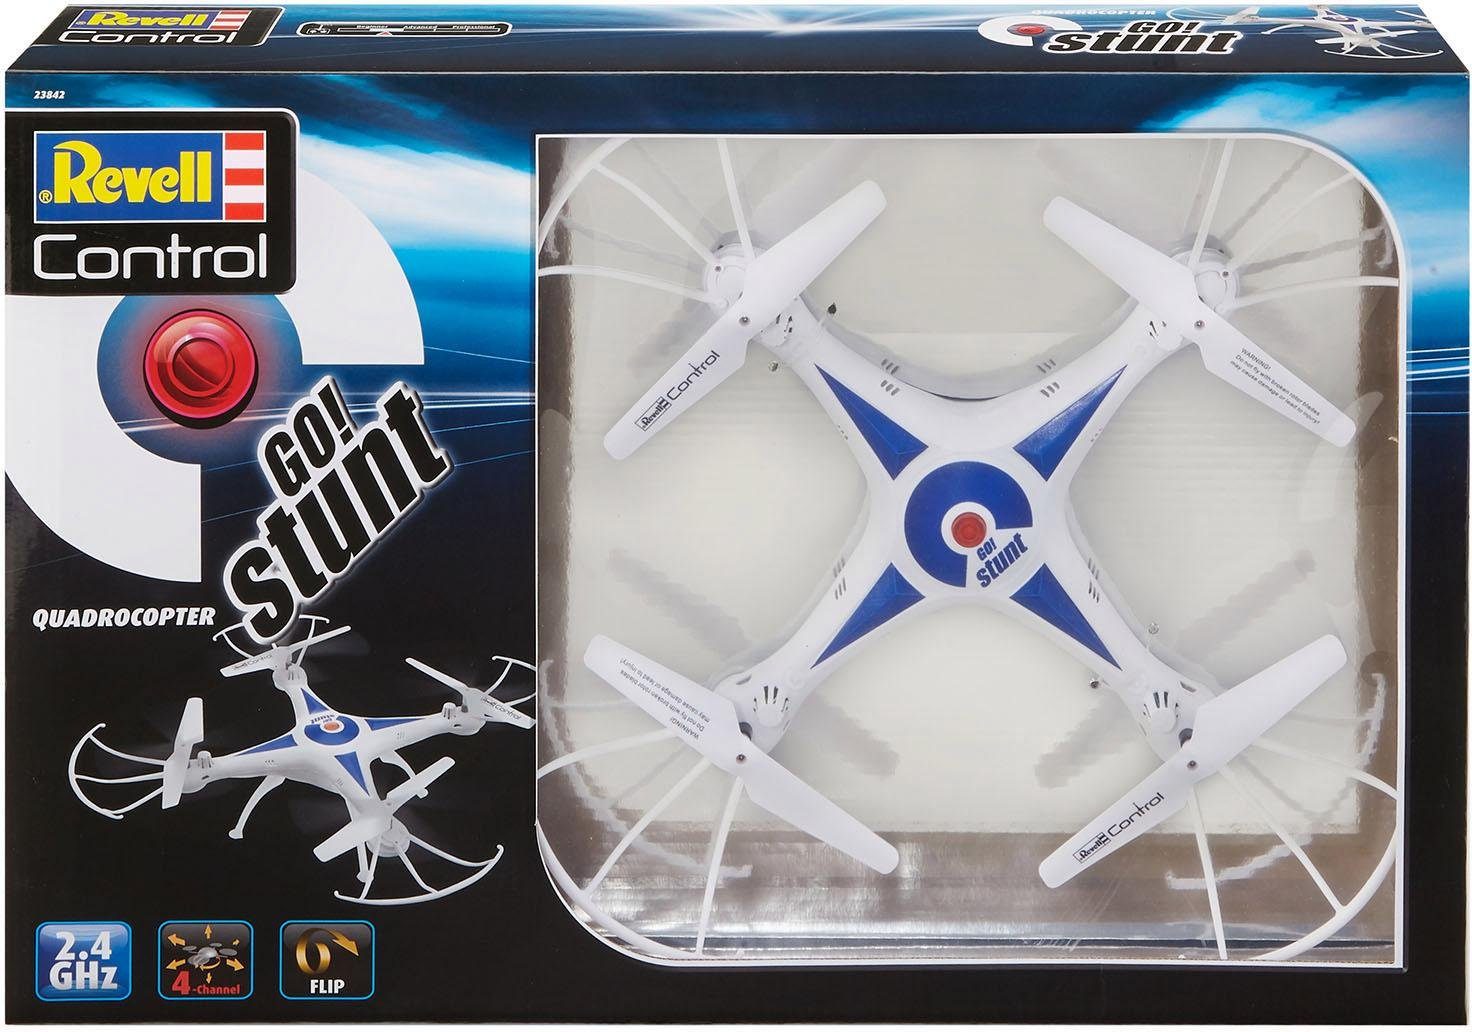 Revell® RC-Quadrocopter »Revell® control, GO! Stunt«, mit LED-Beleuchtung  online kaufen | OTTO